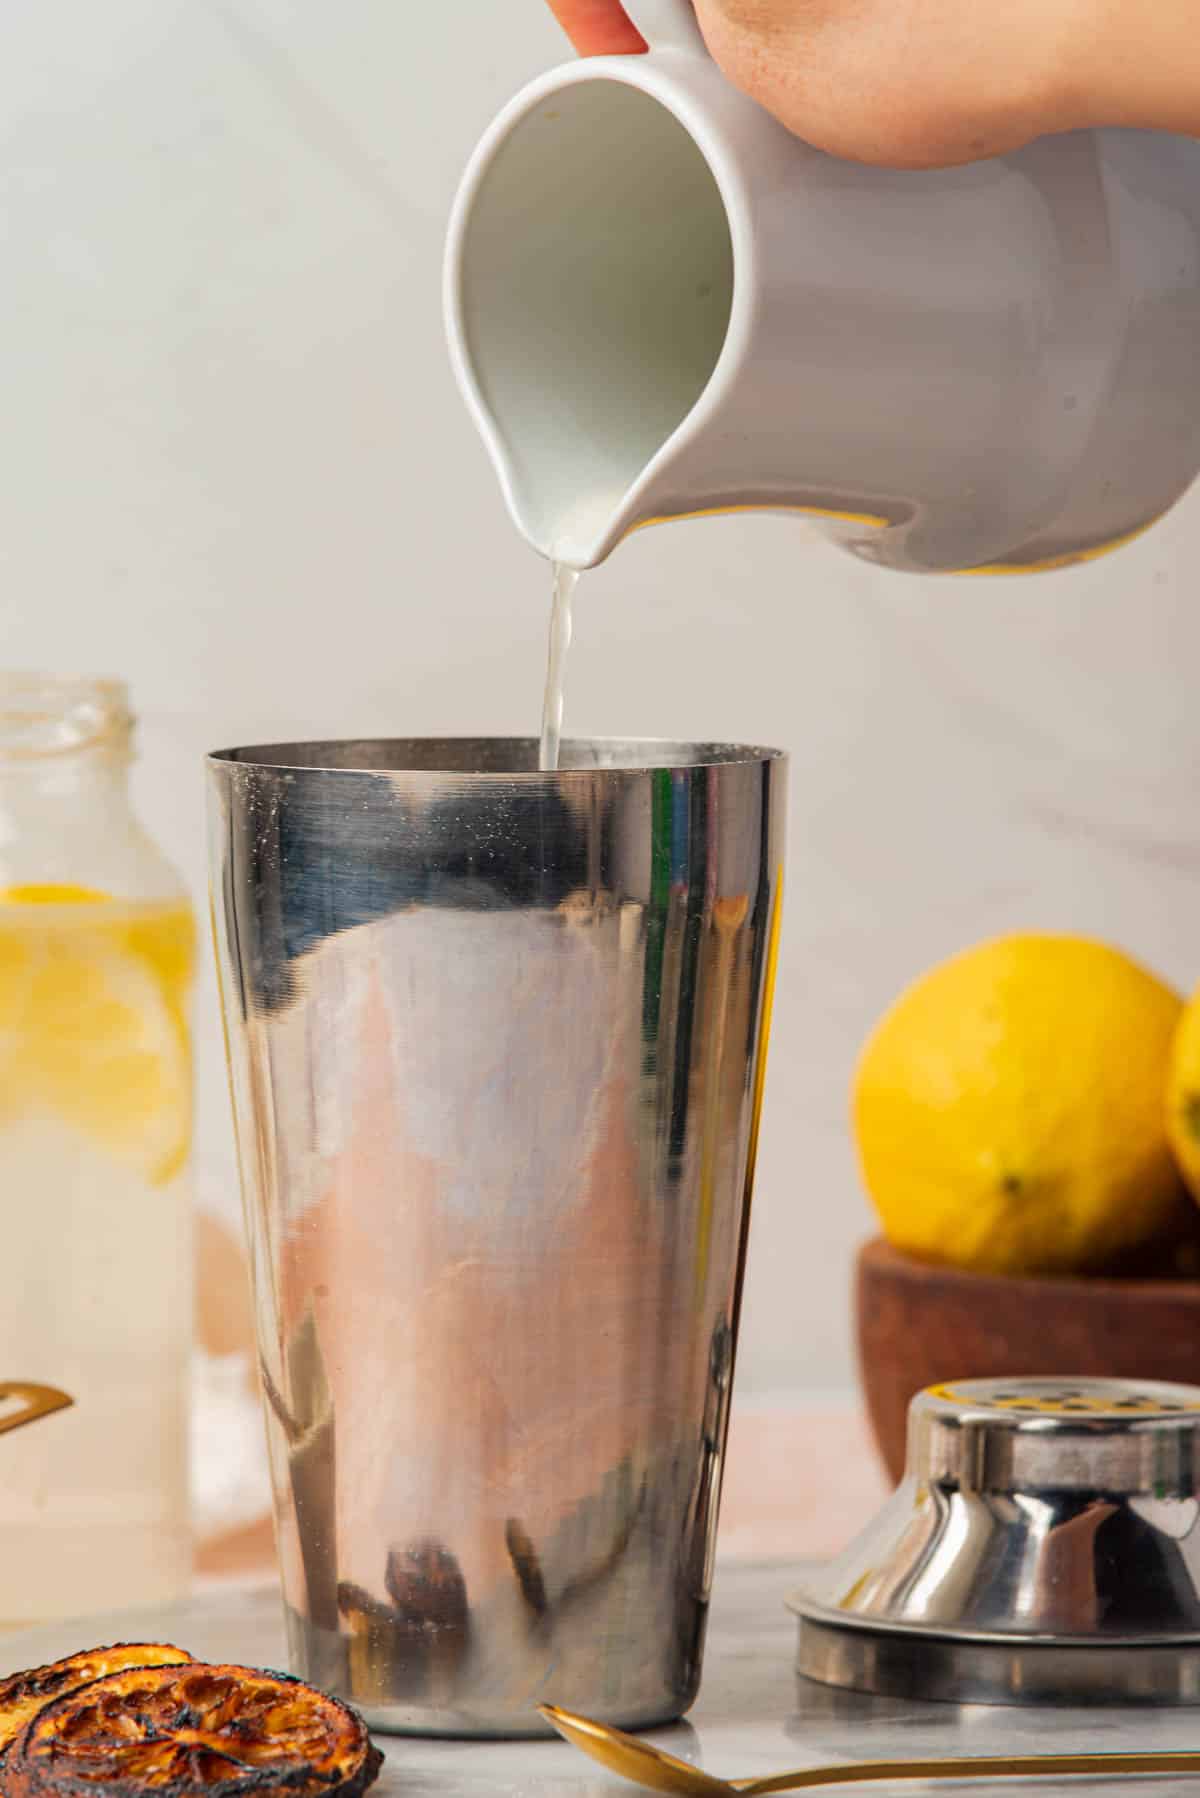 Pouring lemon juice into cocktail shaker with and lemon slices, bowl of lemons, and spoon in background.